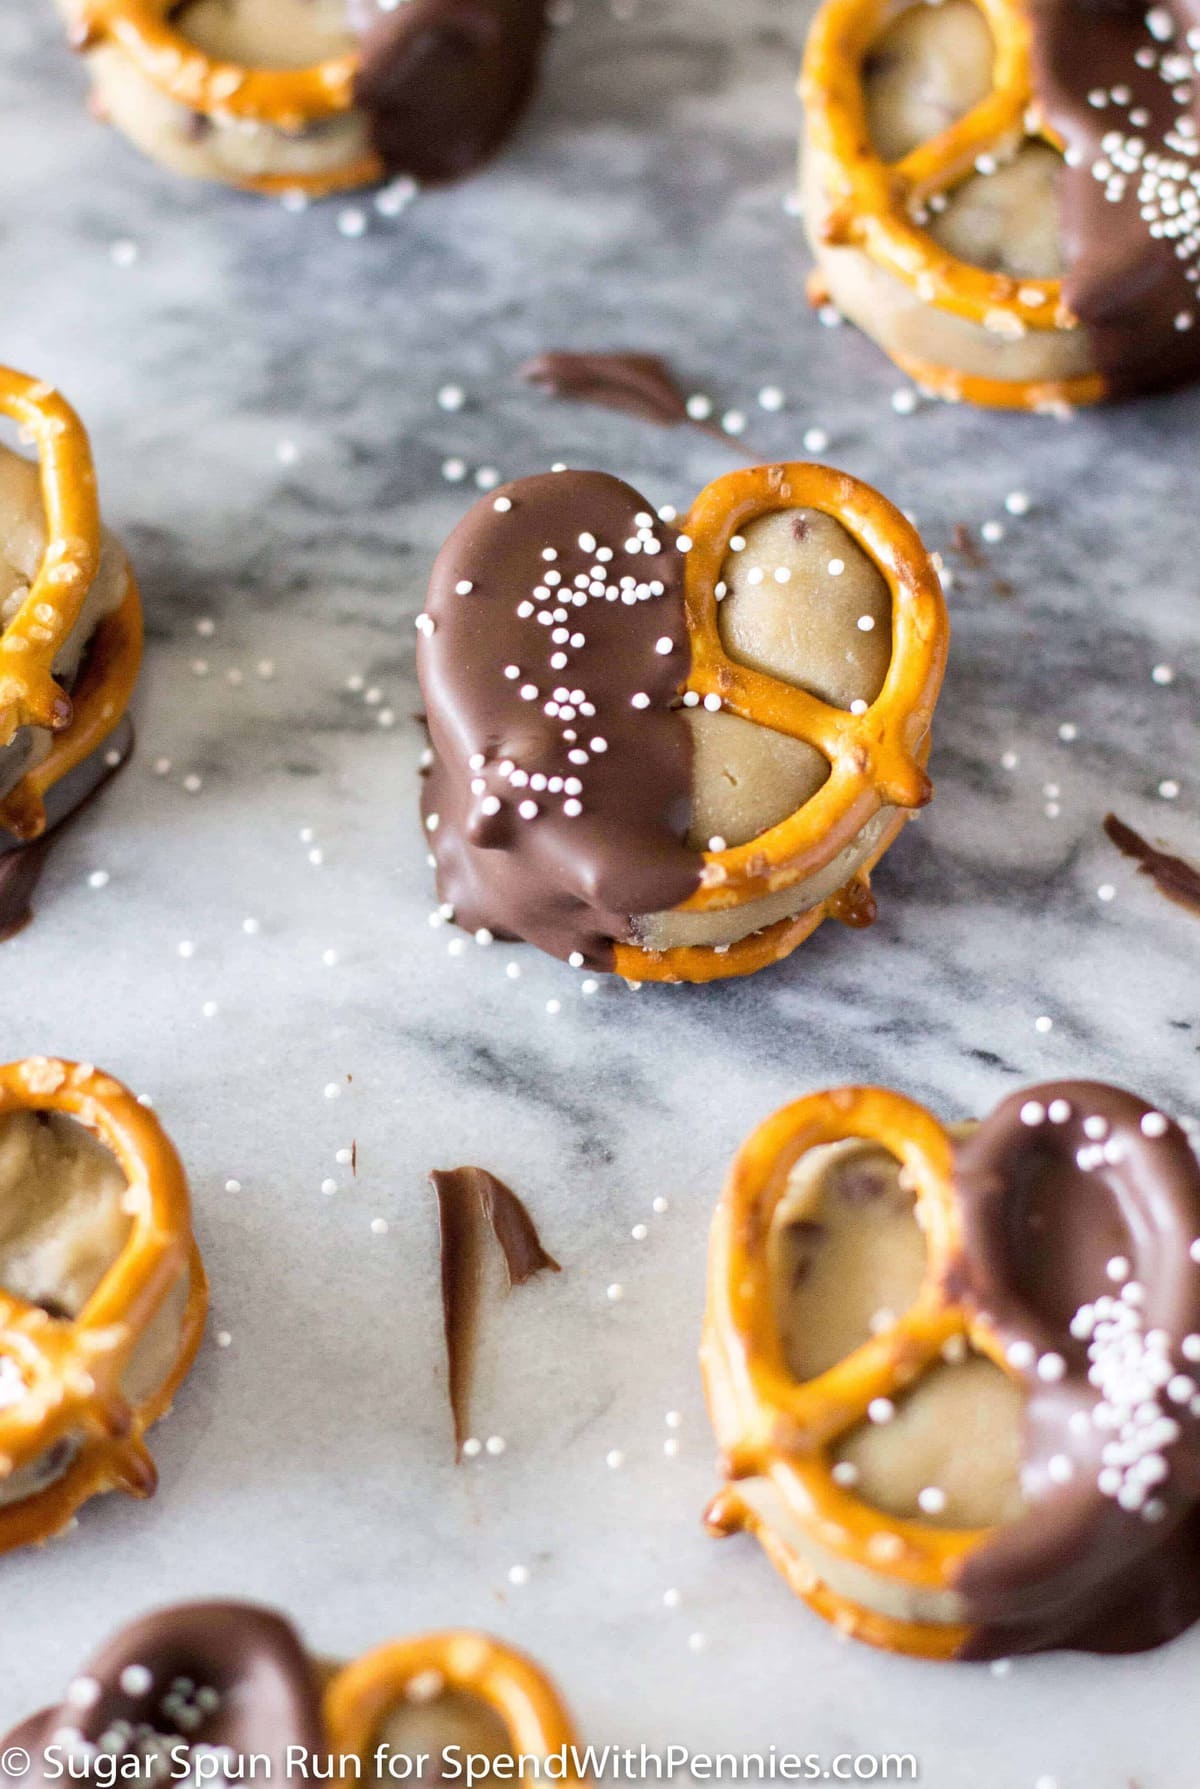 Chocolate Covered Pretzel Bites Stuffed with Cookie Dough